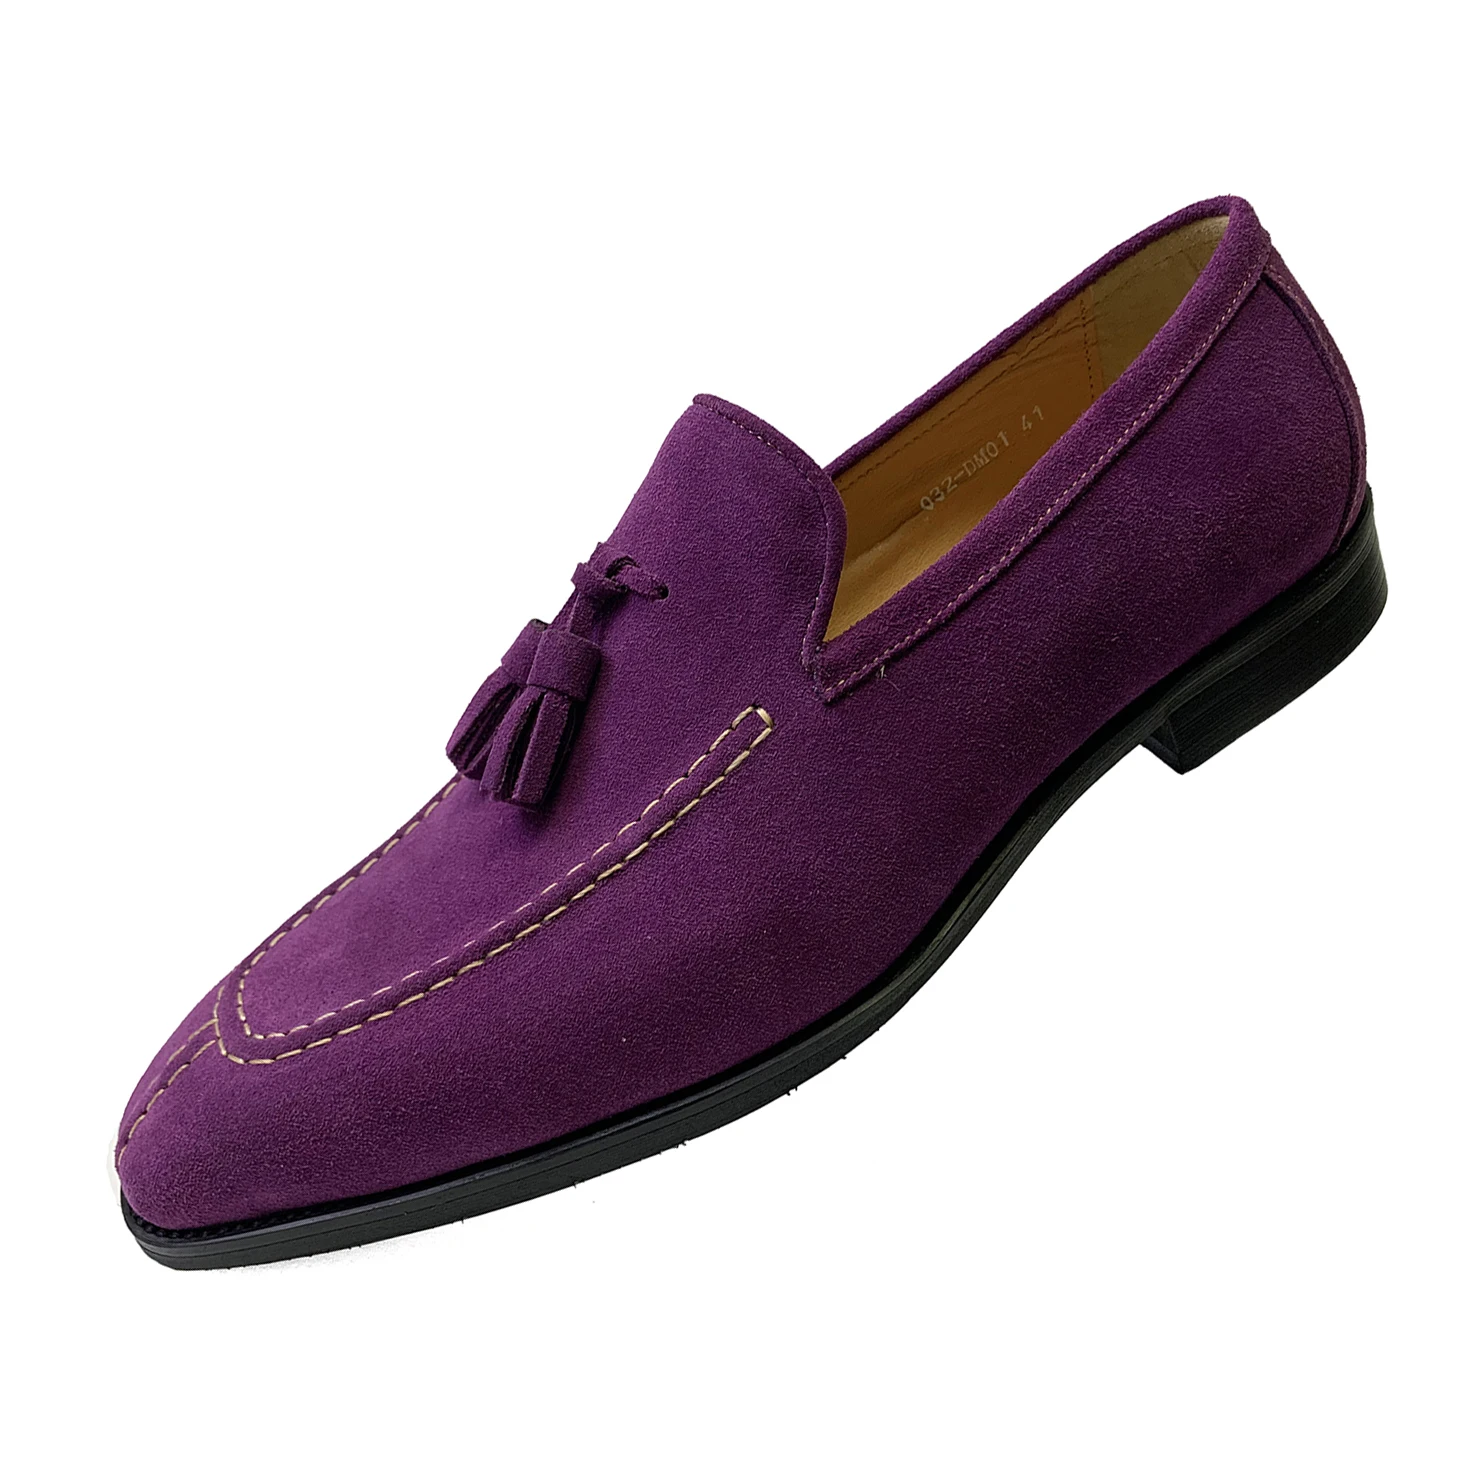 Luxury Fashion Luxury Casual Shoes Men Loafers Purple Youth Trendy Loafers Genuine Leather Penny Suede Loafer Shoes Formal Shoes